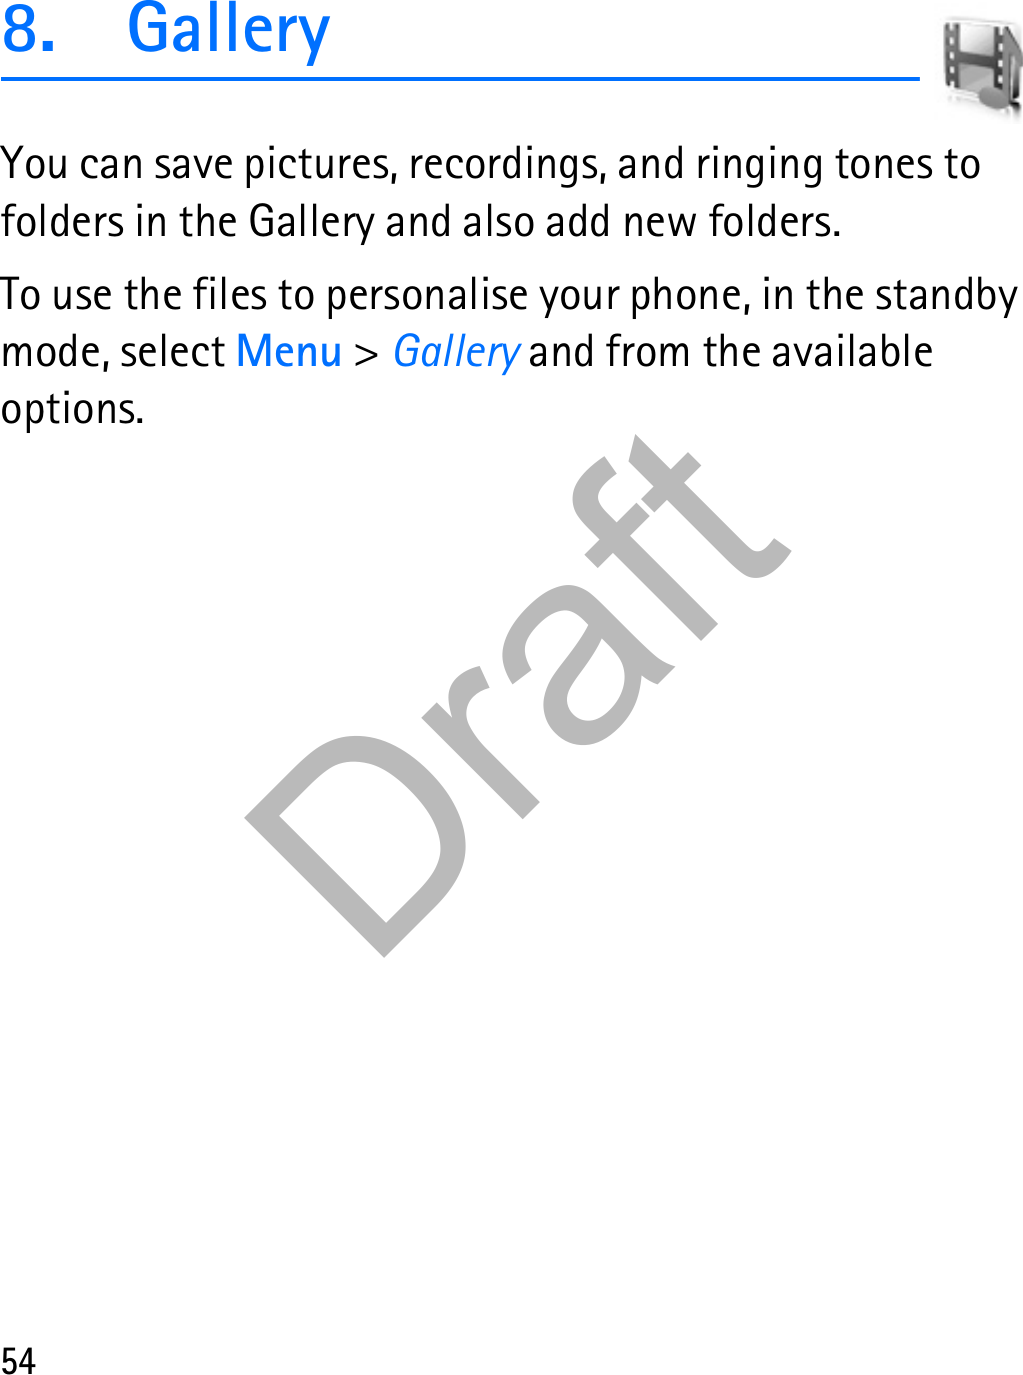 548. GalleryYou can save pictures, recordings, and ringing tones to folders in the Gallery and also add new folders.To use the files to personalise your phone, in the standby mode, select Menu &gt; Gallery and from the available options.Draft